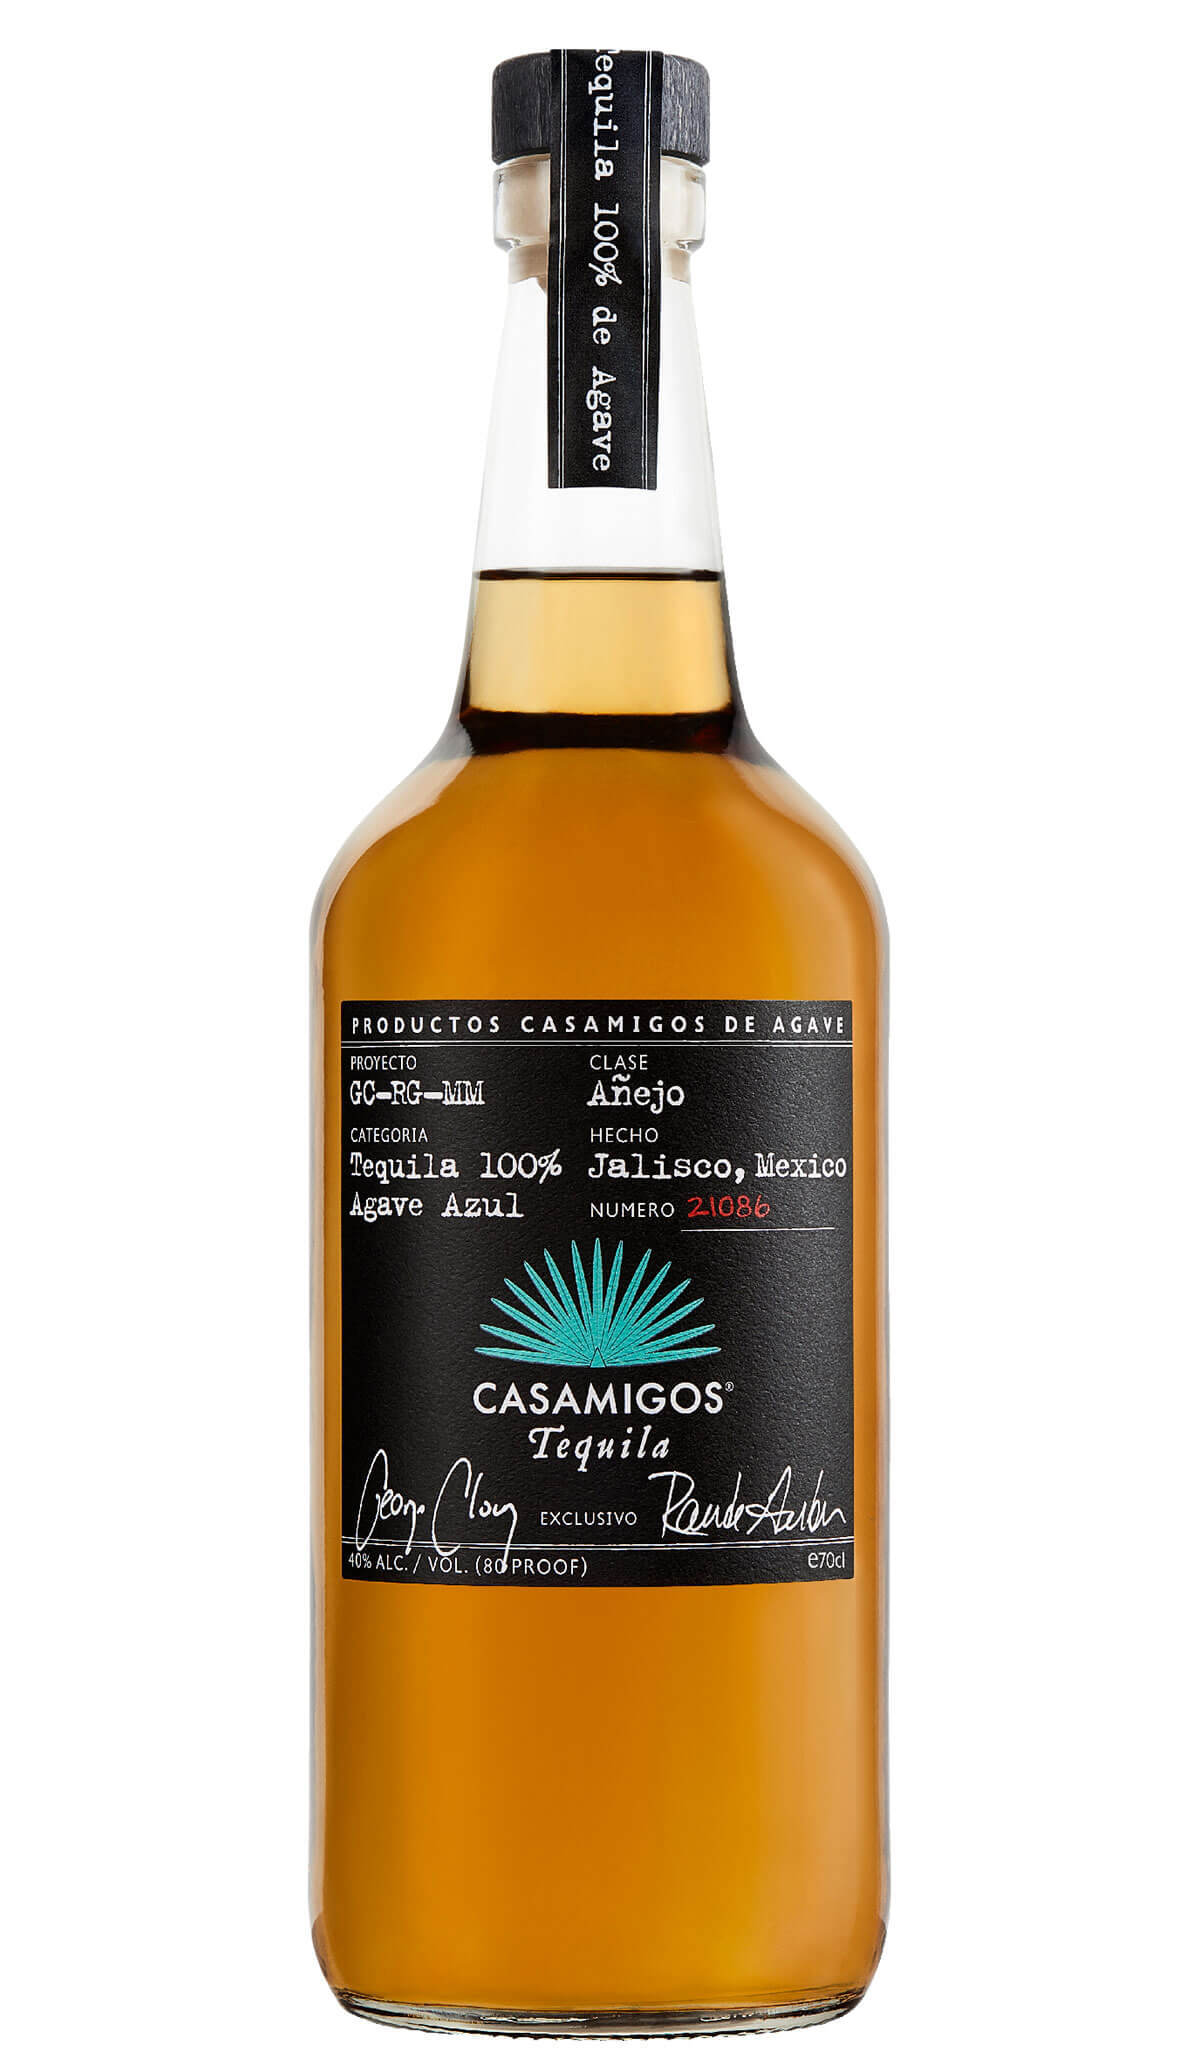 Find out more, explore the range and buy Casamigos Añejo Tequila 700ml available online at Wine Sellers Direct - Australia's independent liquor specialists.